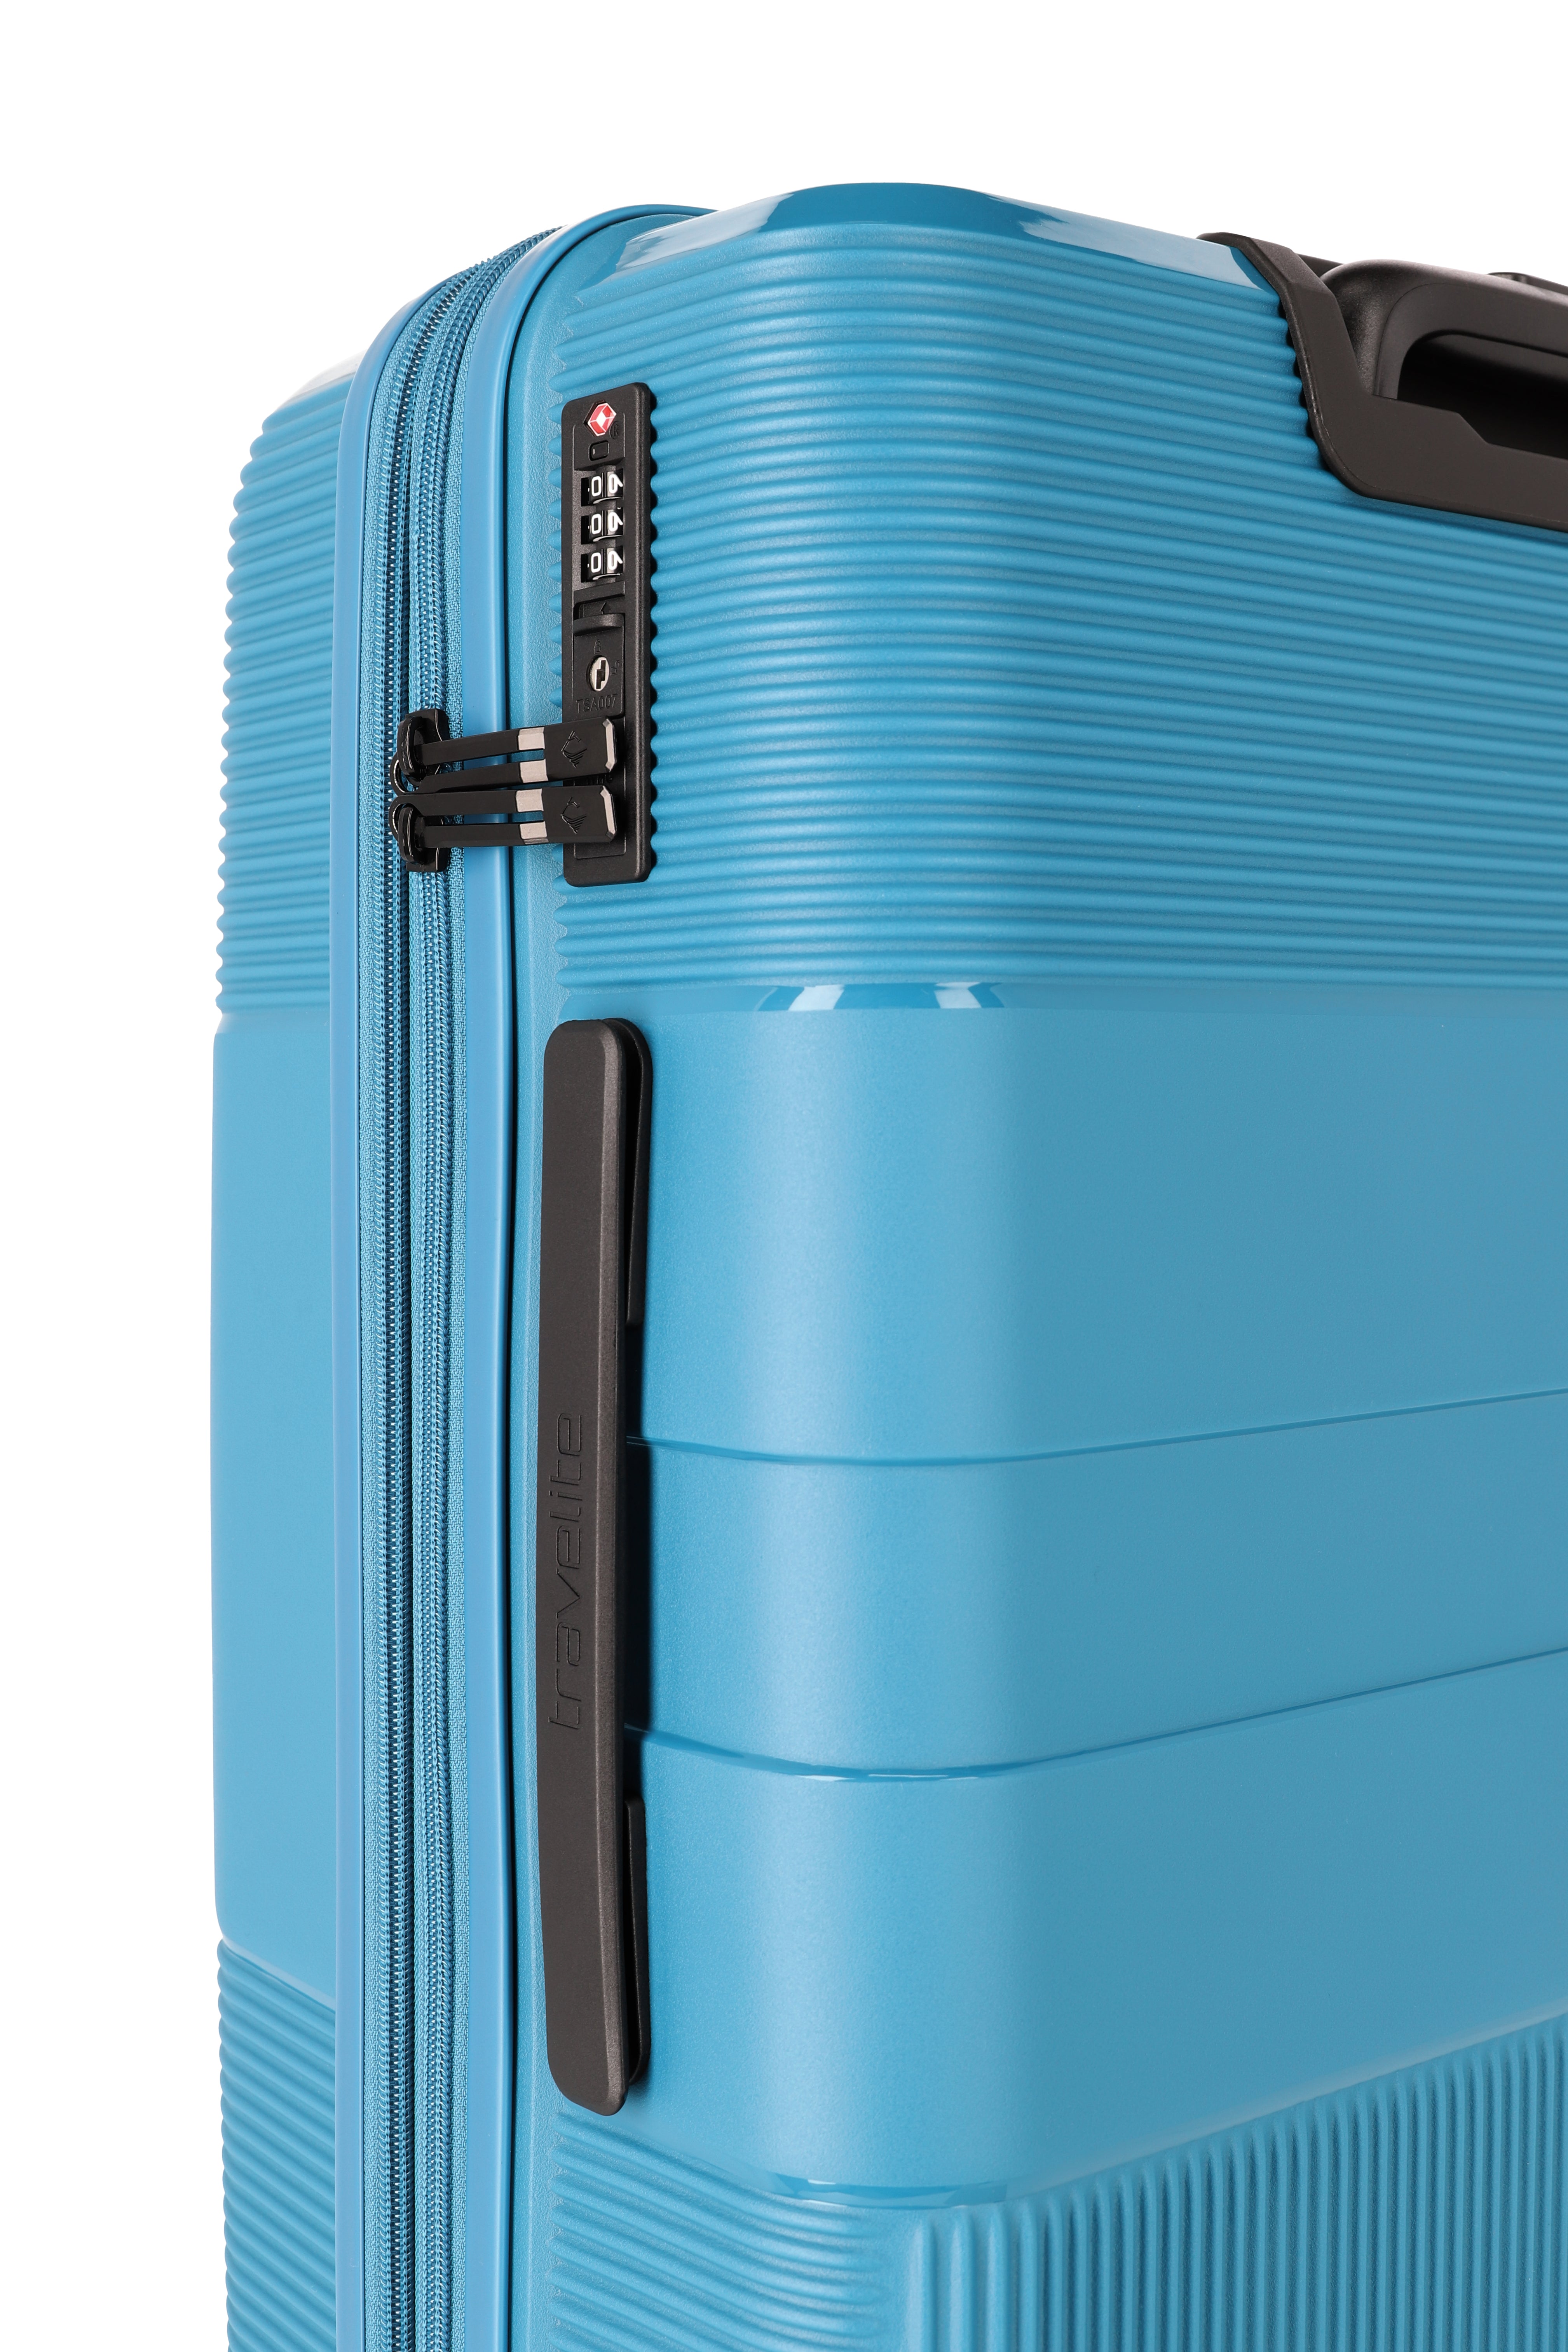 Waal Trolley M Exp. turquoise